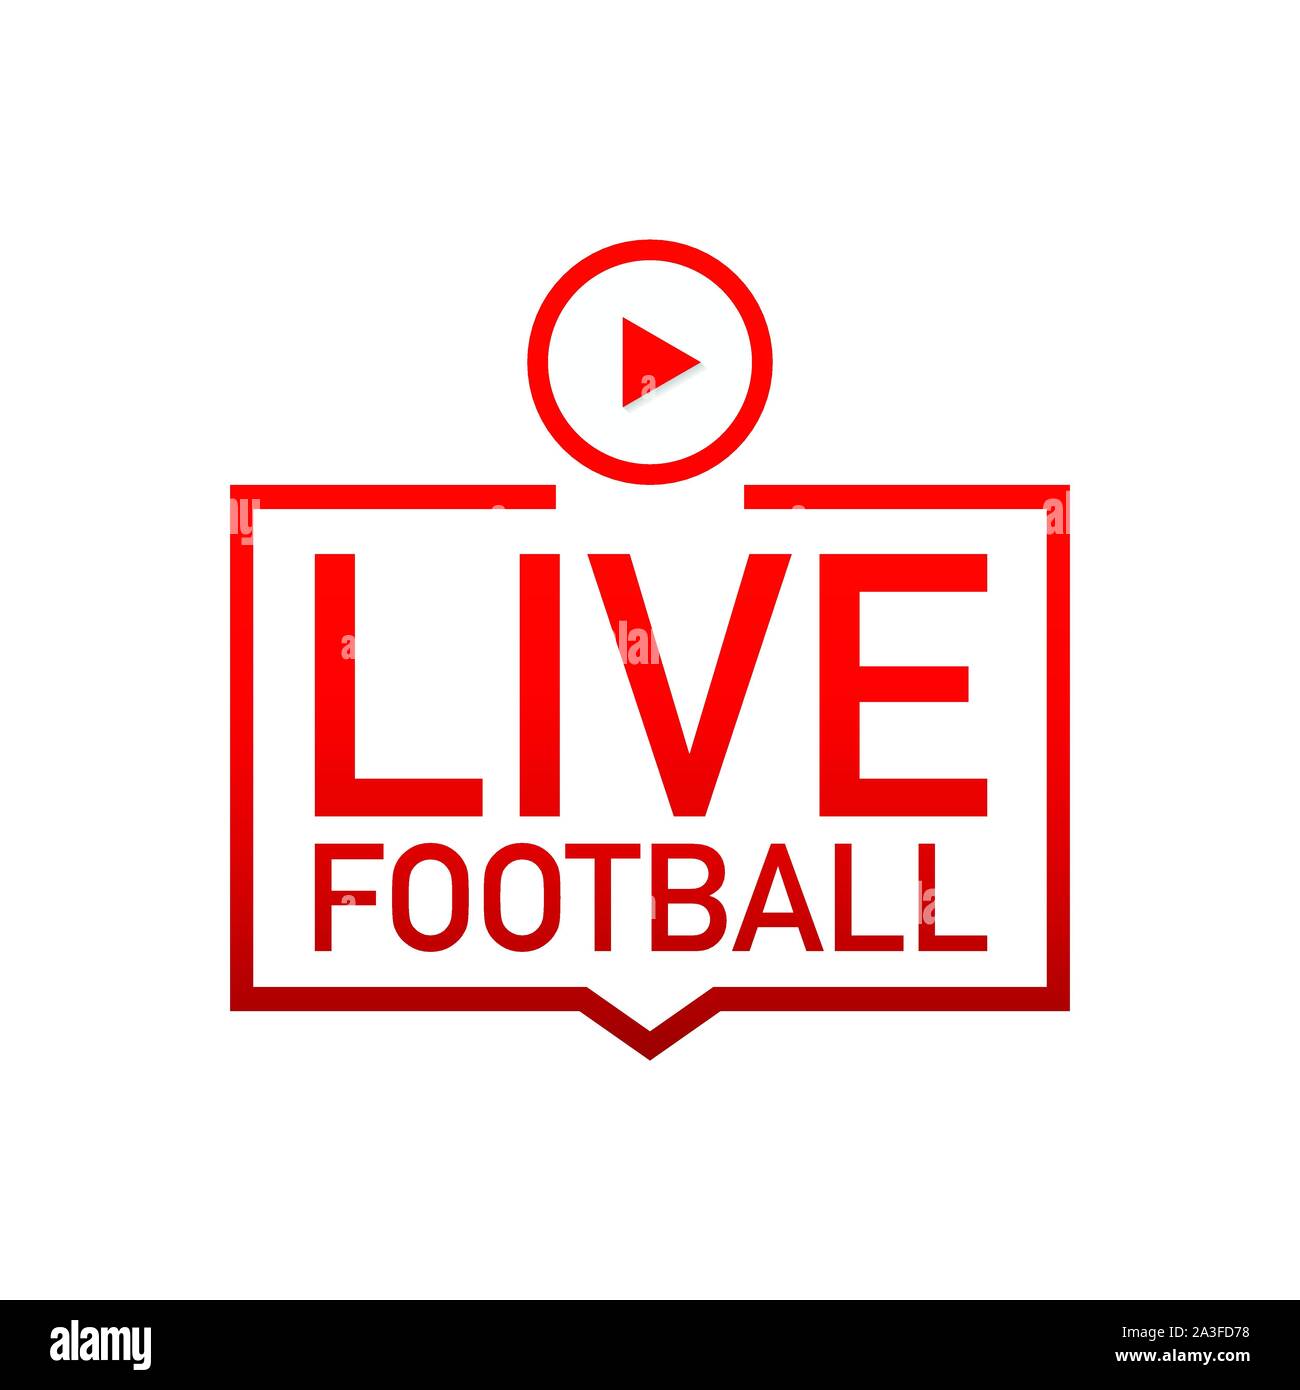 Live Football streaming Icon, Button for broadcasting or online football stream